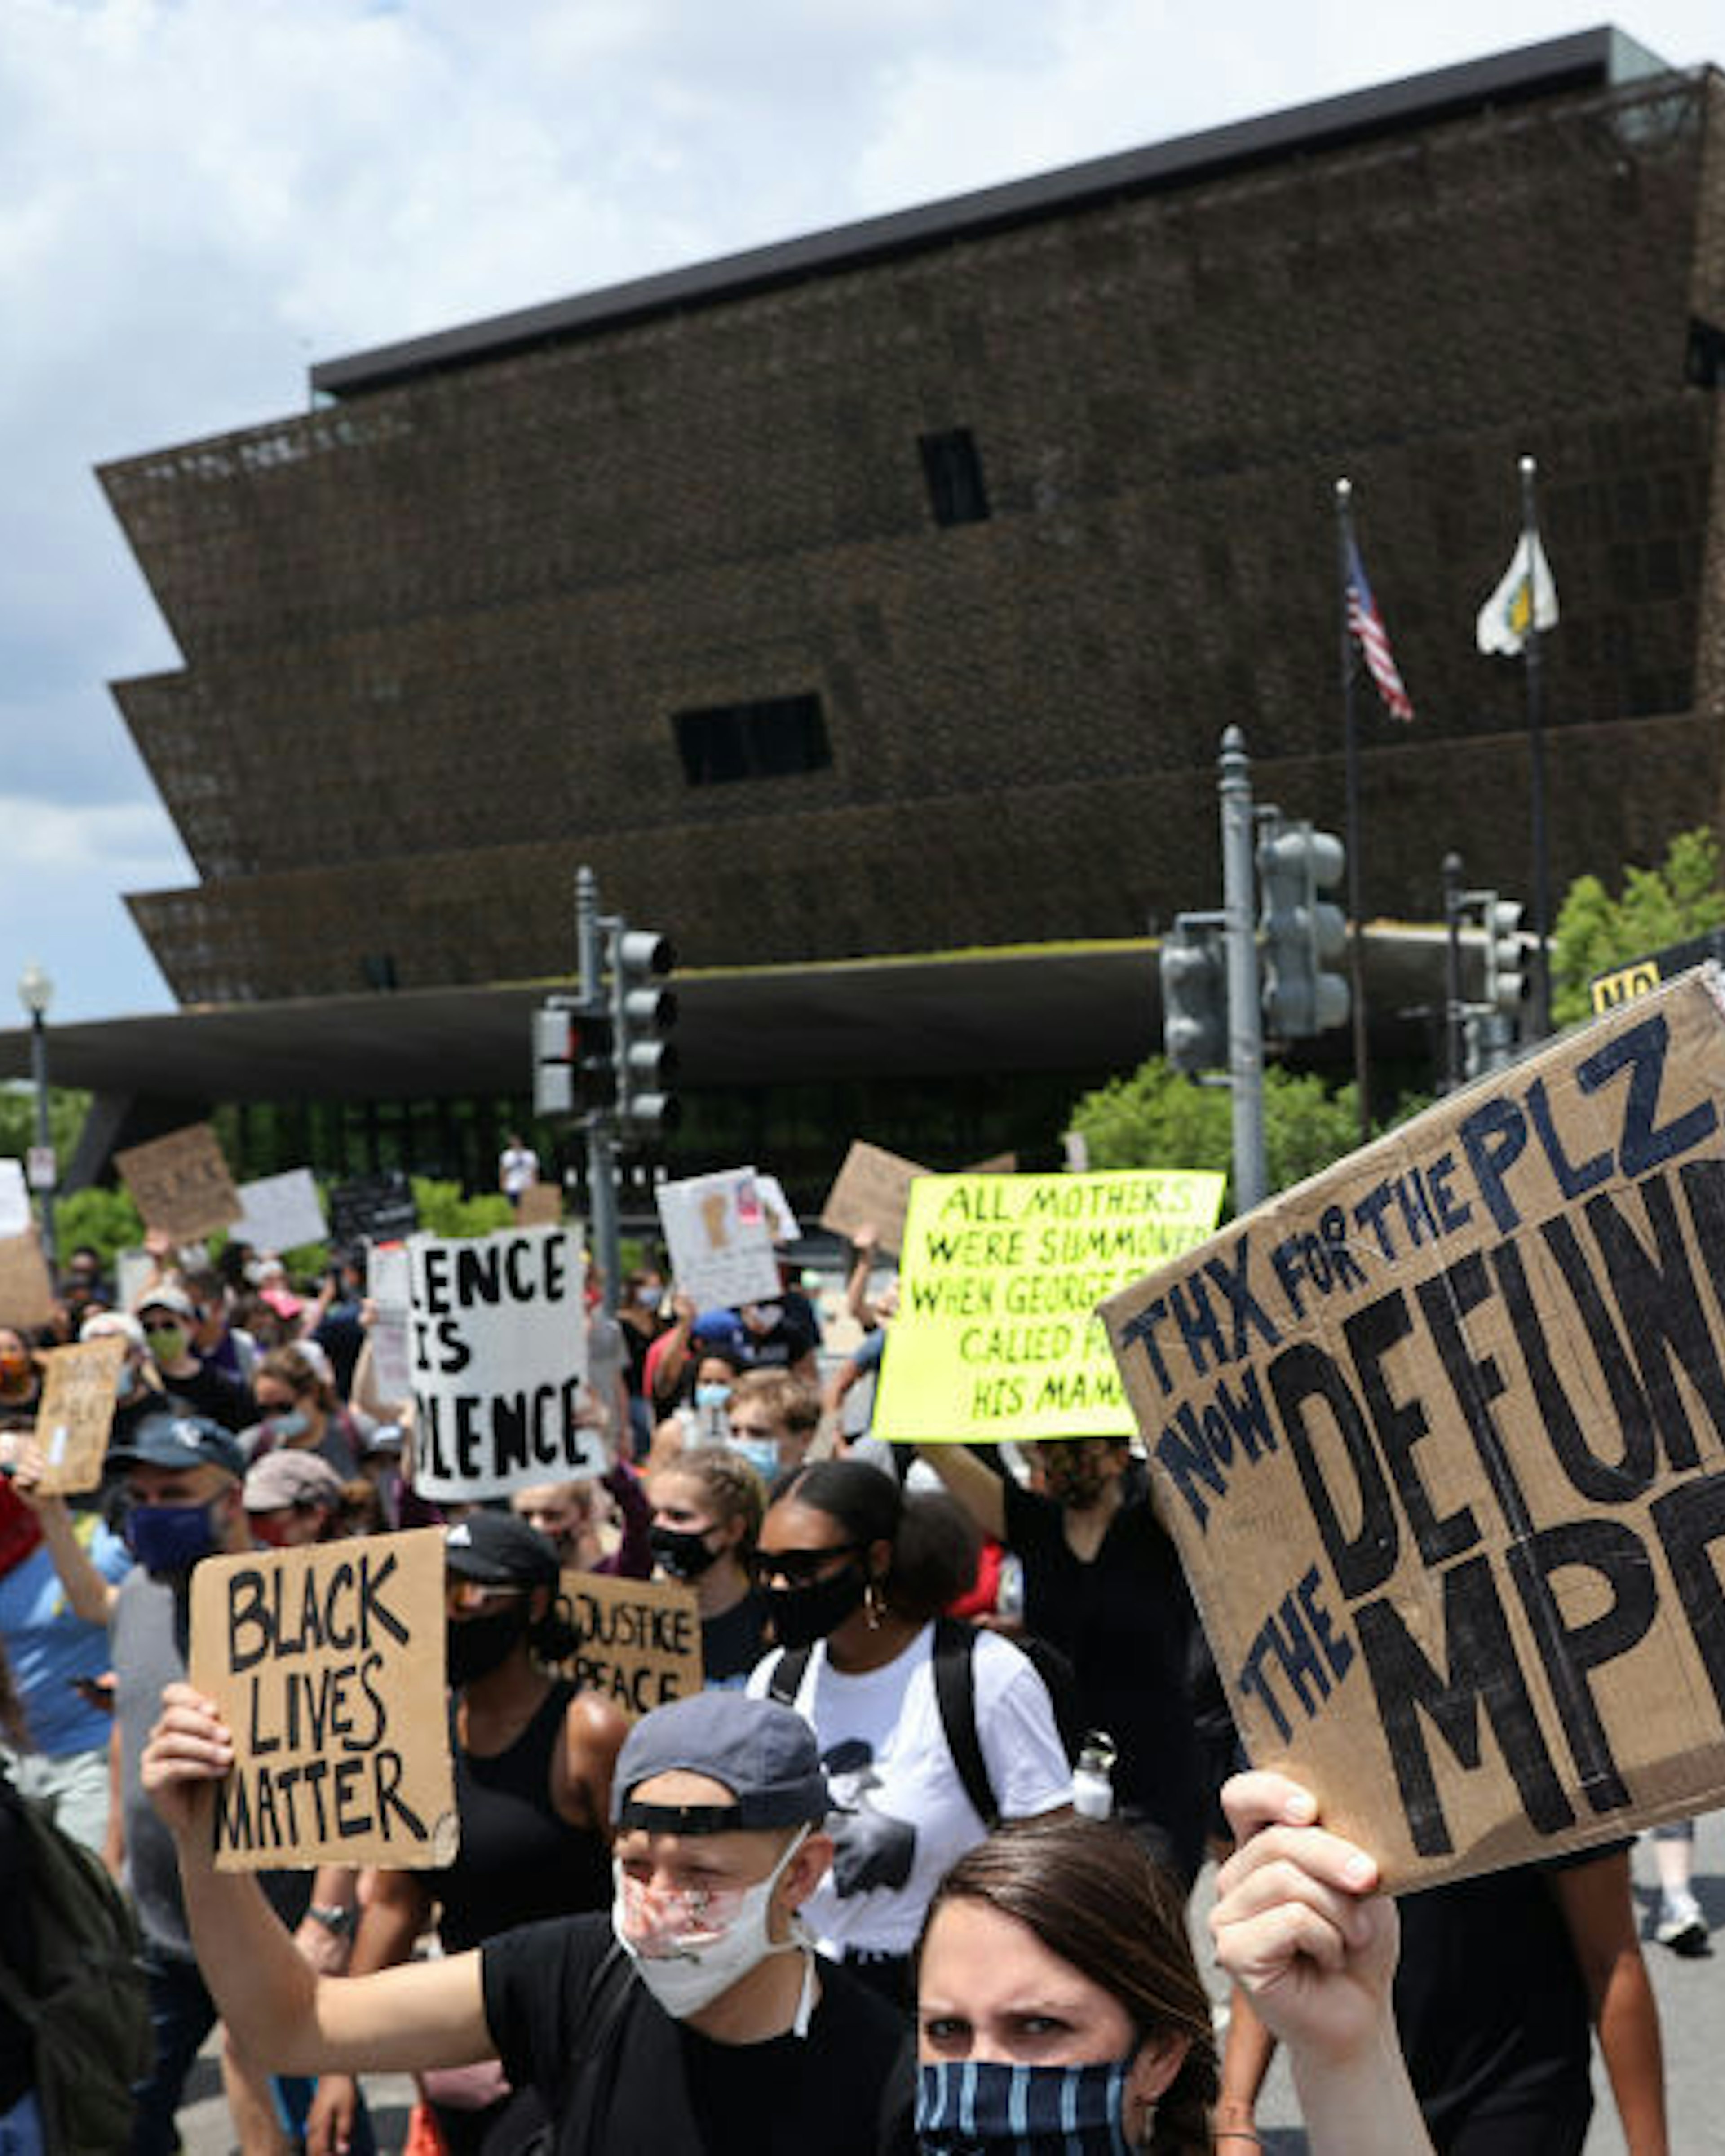 Demonstrators march from The National Museum of African American History and Culture to the Martin Luther King Jr. Memorial to mark the Juneteenth holiday June 19, 2020 in Washington, DC. Juneteenth commemorates June 19, 1865, when a Union general read orders in Galveston, Texas stating all enslaved people in Texas were free according to federal law, effectively ending slavery in what remained of the Confederacy. (Photo by Chip Somodevilla/Getty Images)